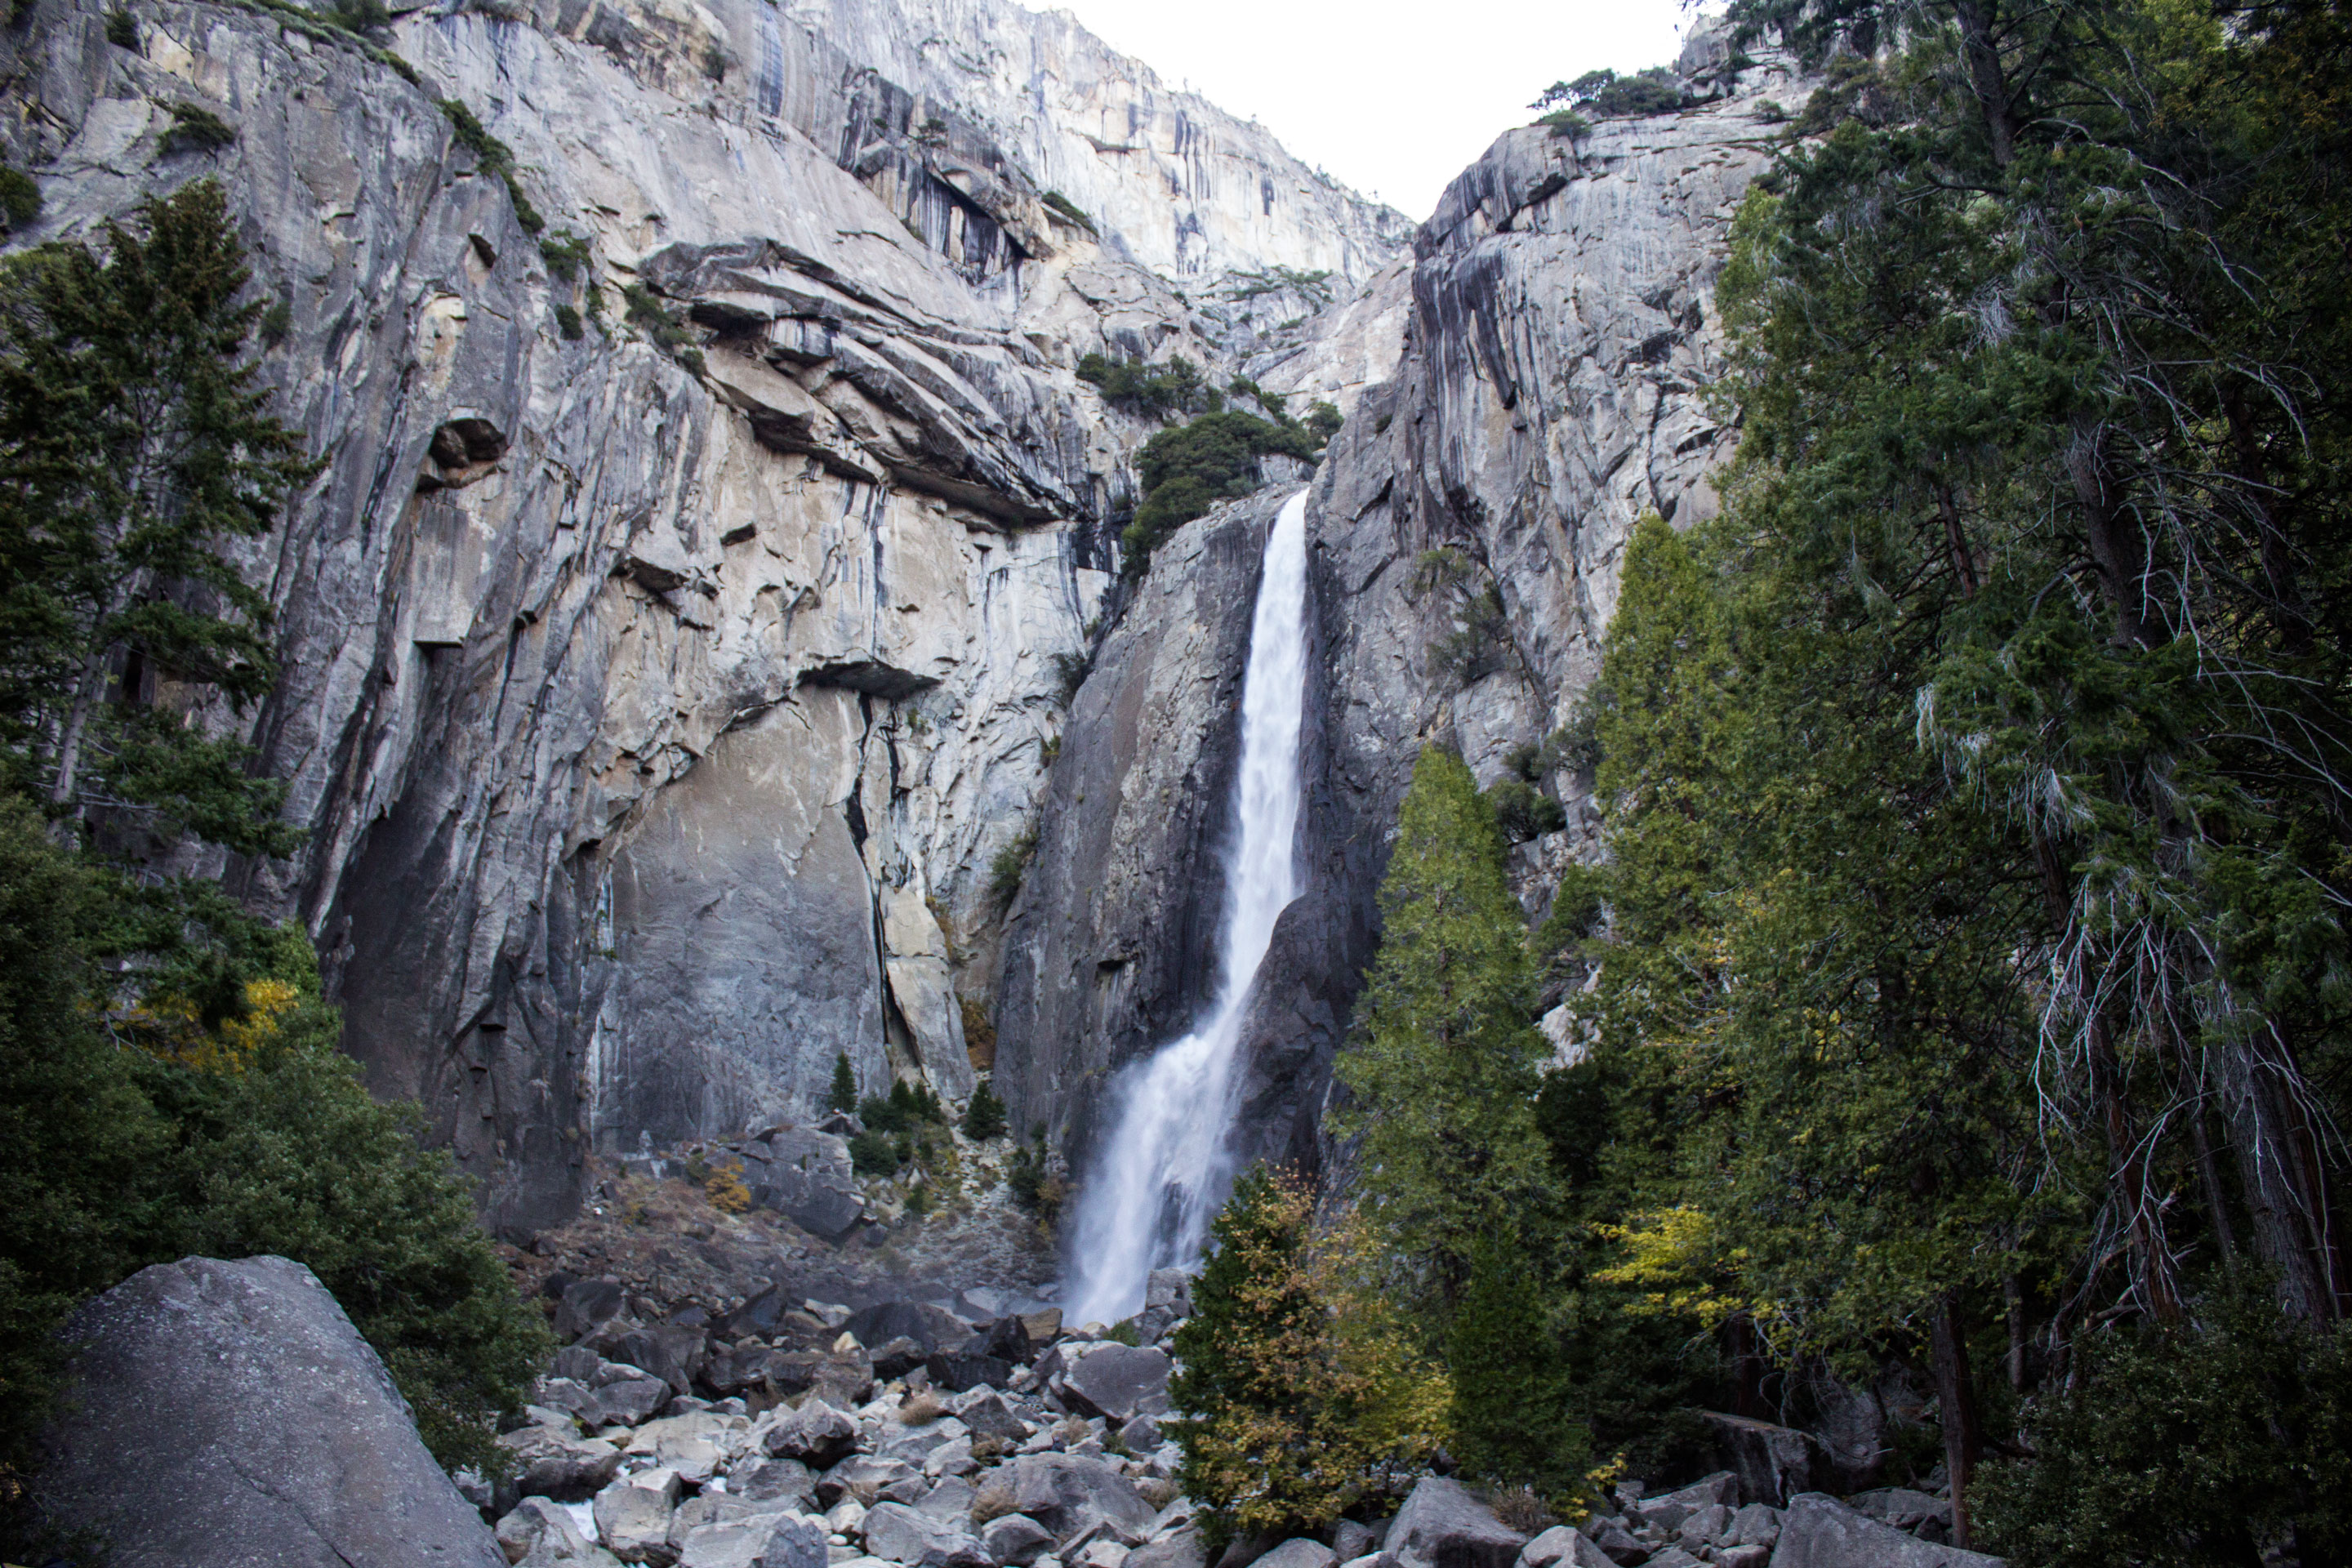 A waterfall flowing down a granite cliff.